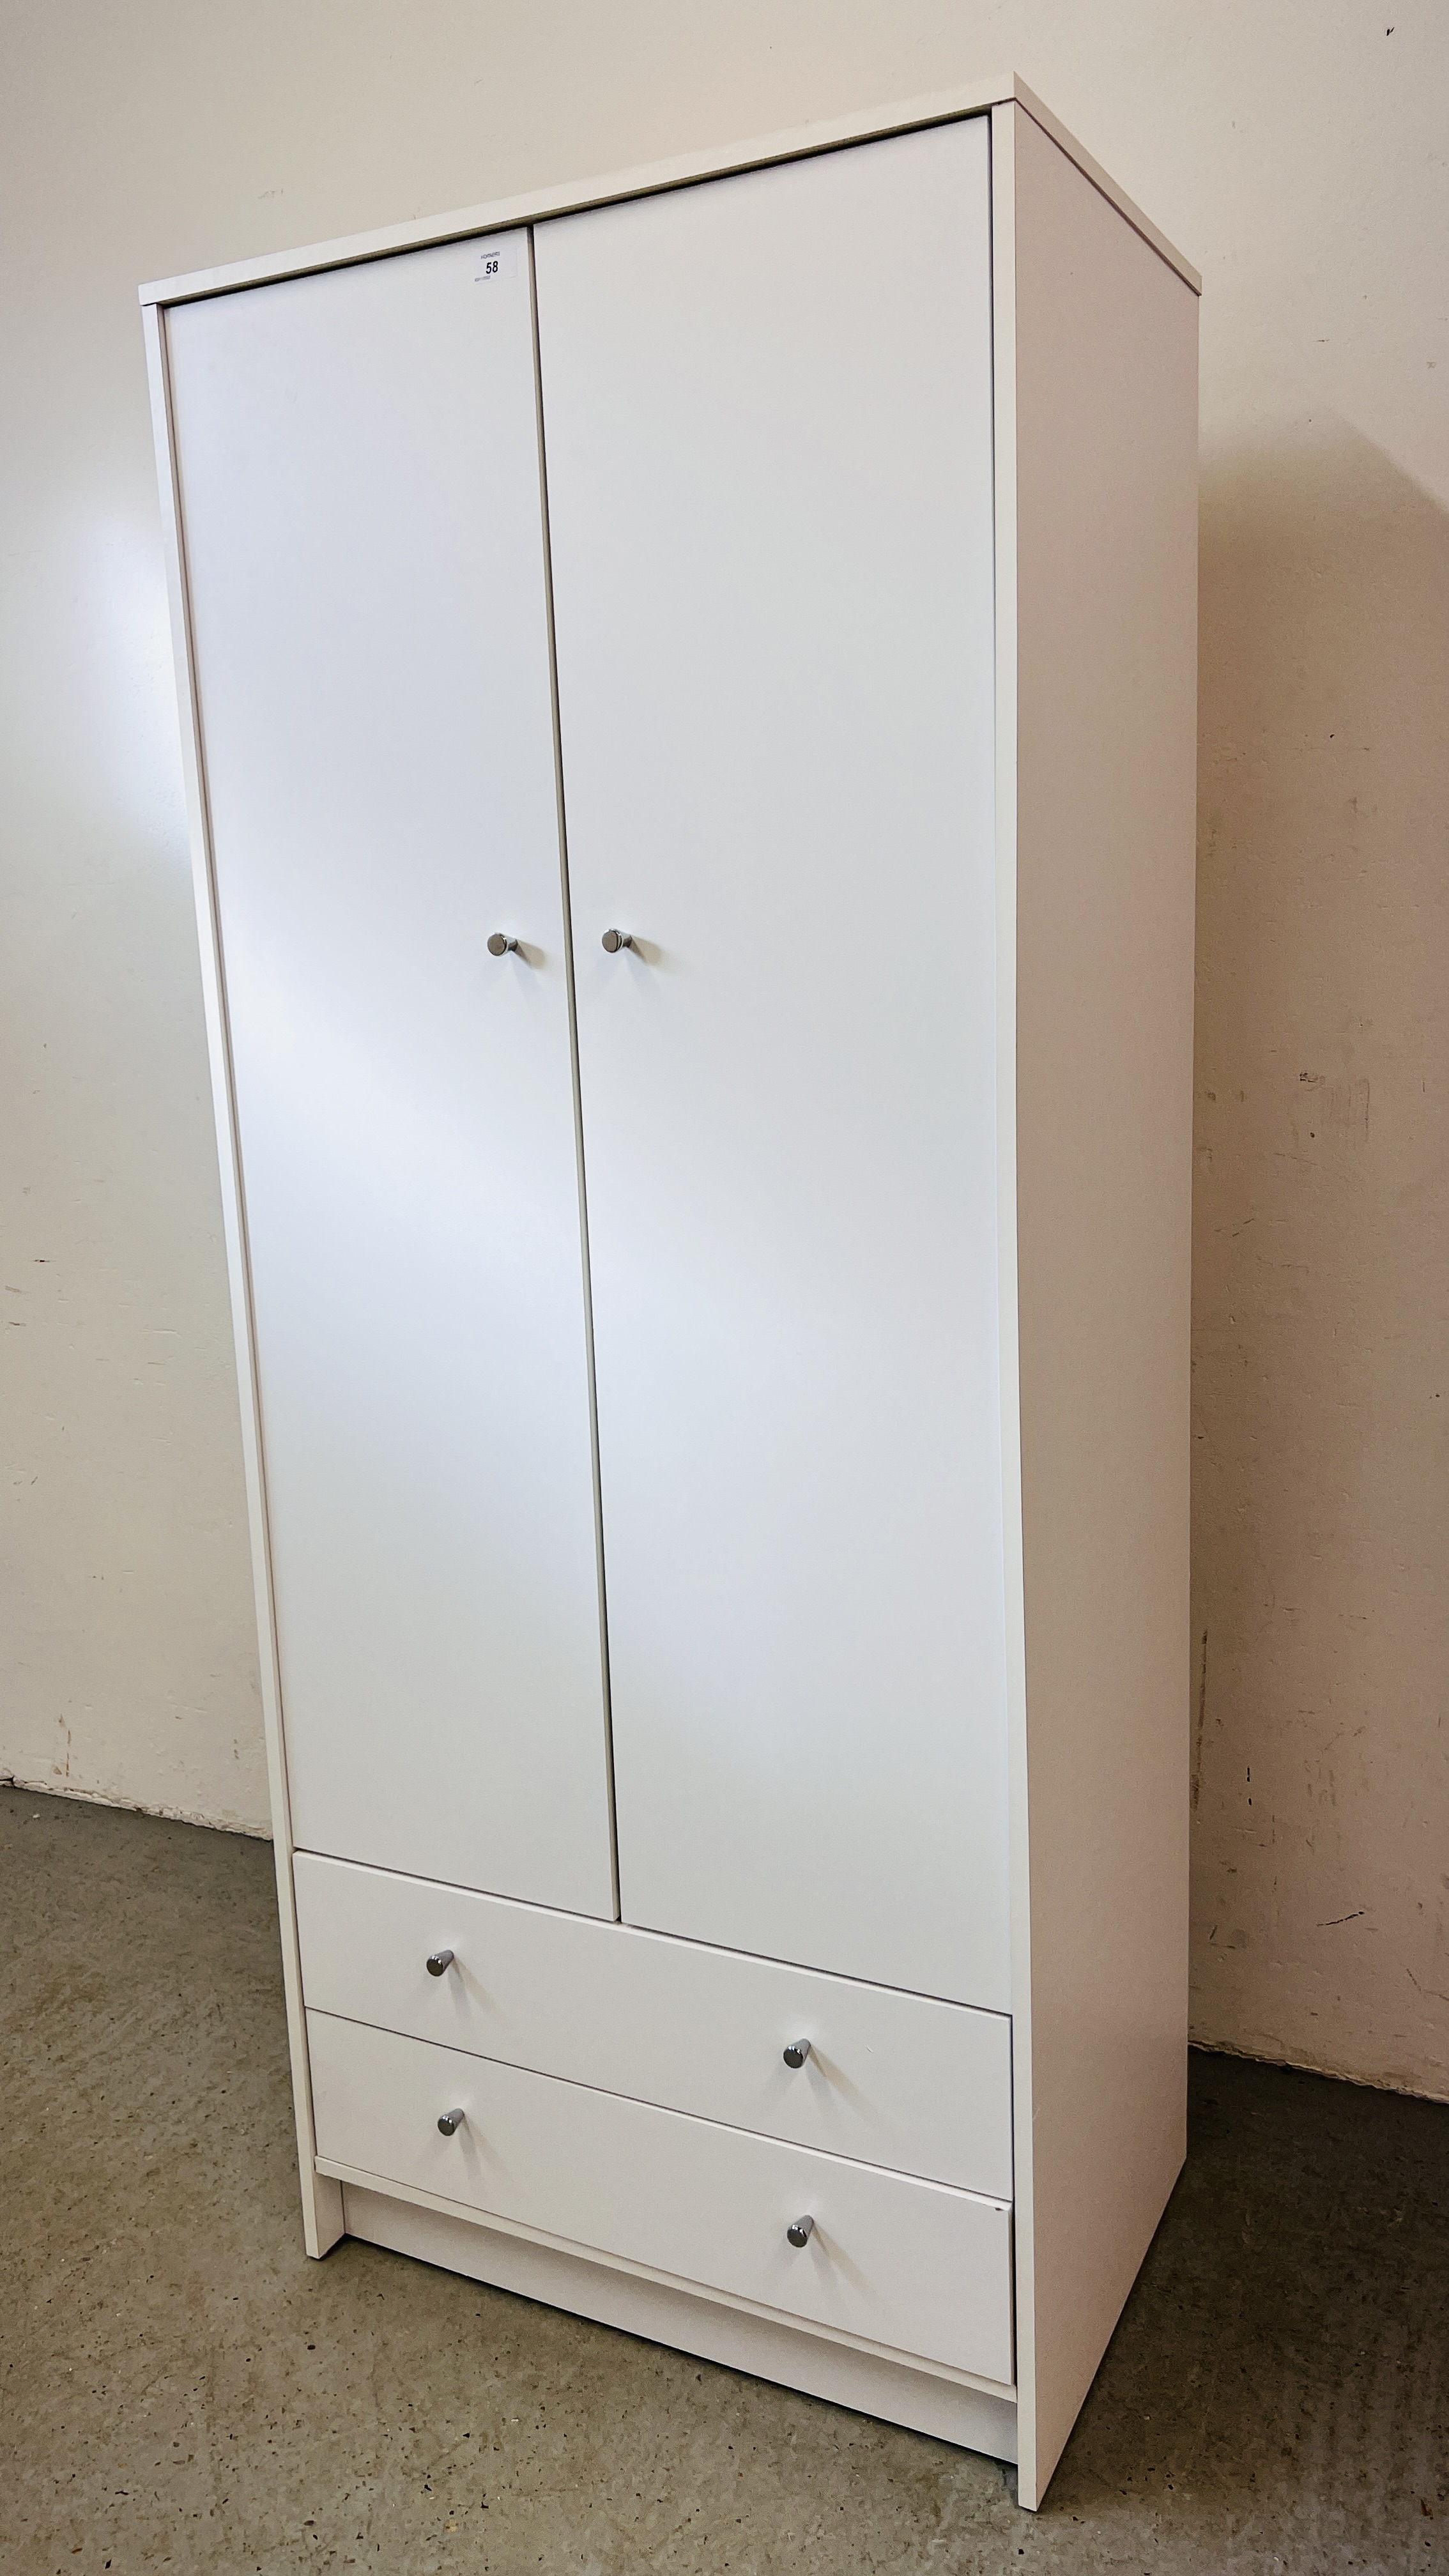 A MODERN TWO DOOR TWO DRAWER WHITE FINISH WARDROBE